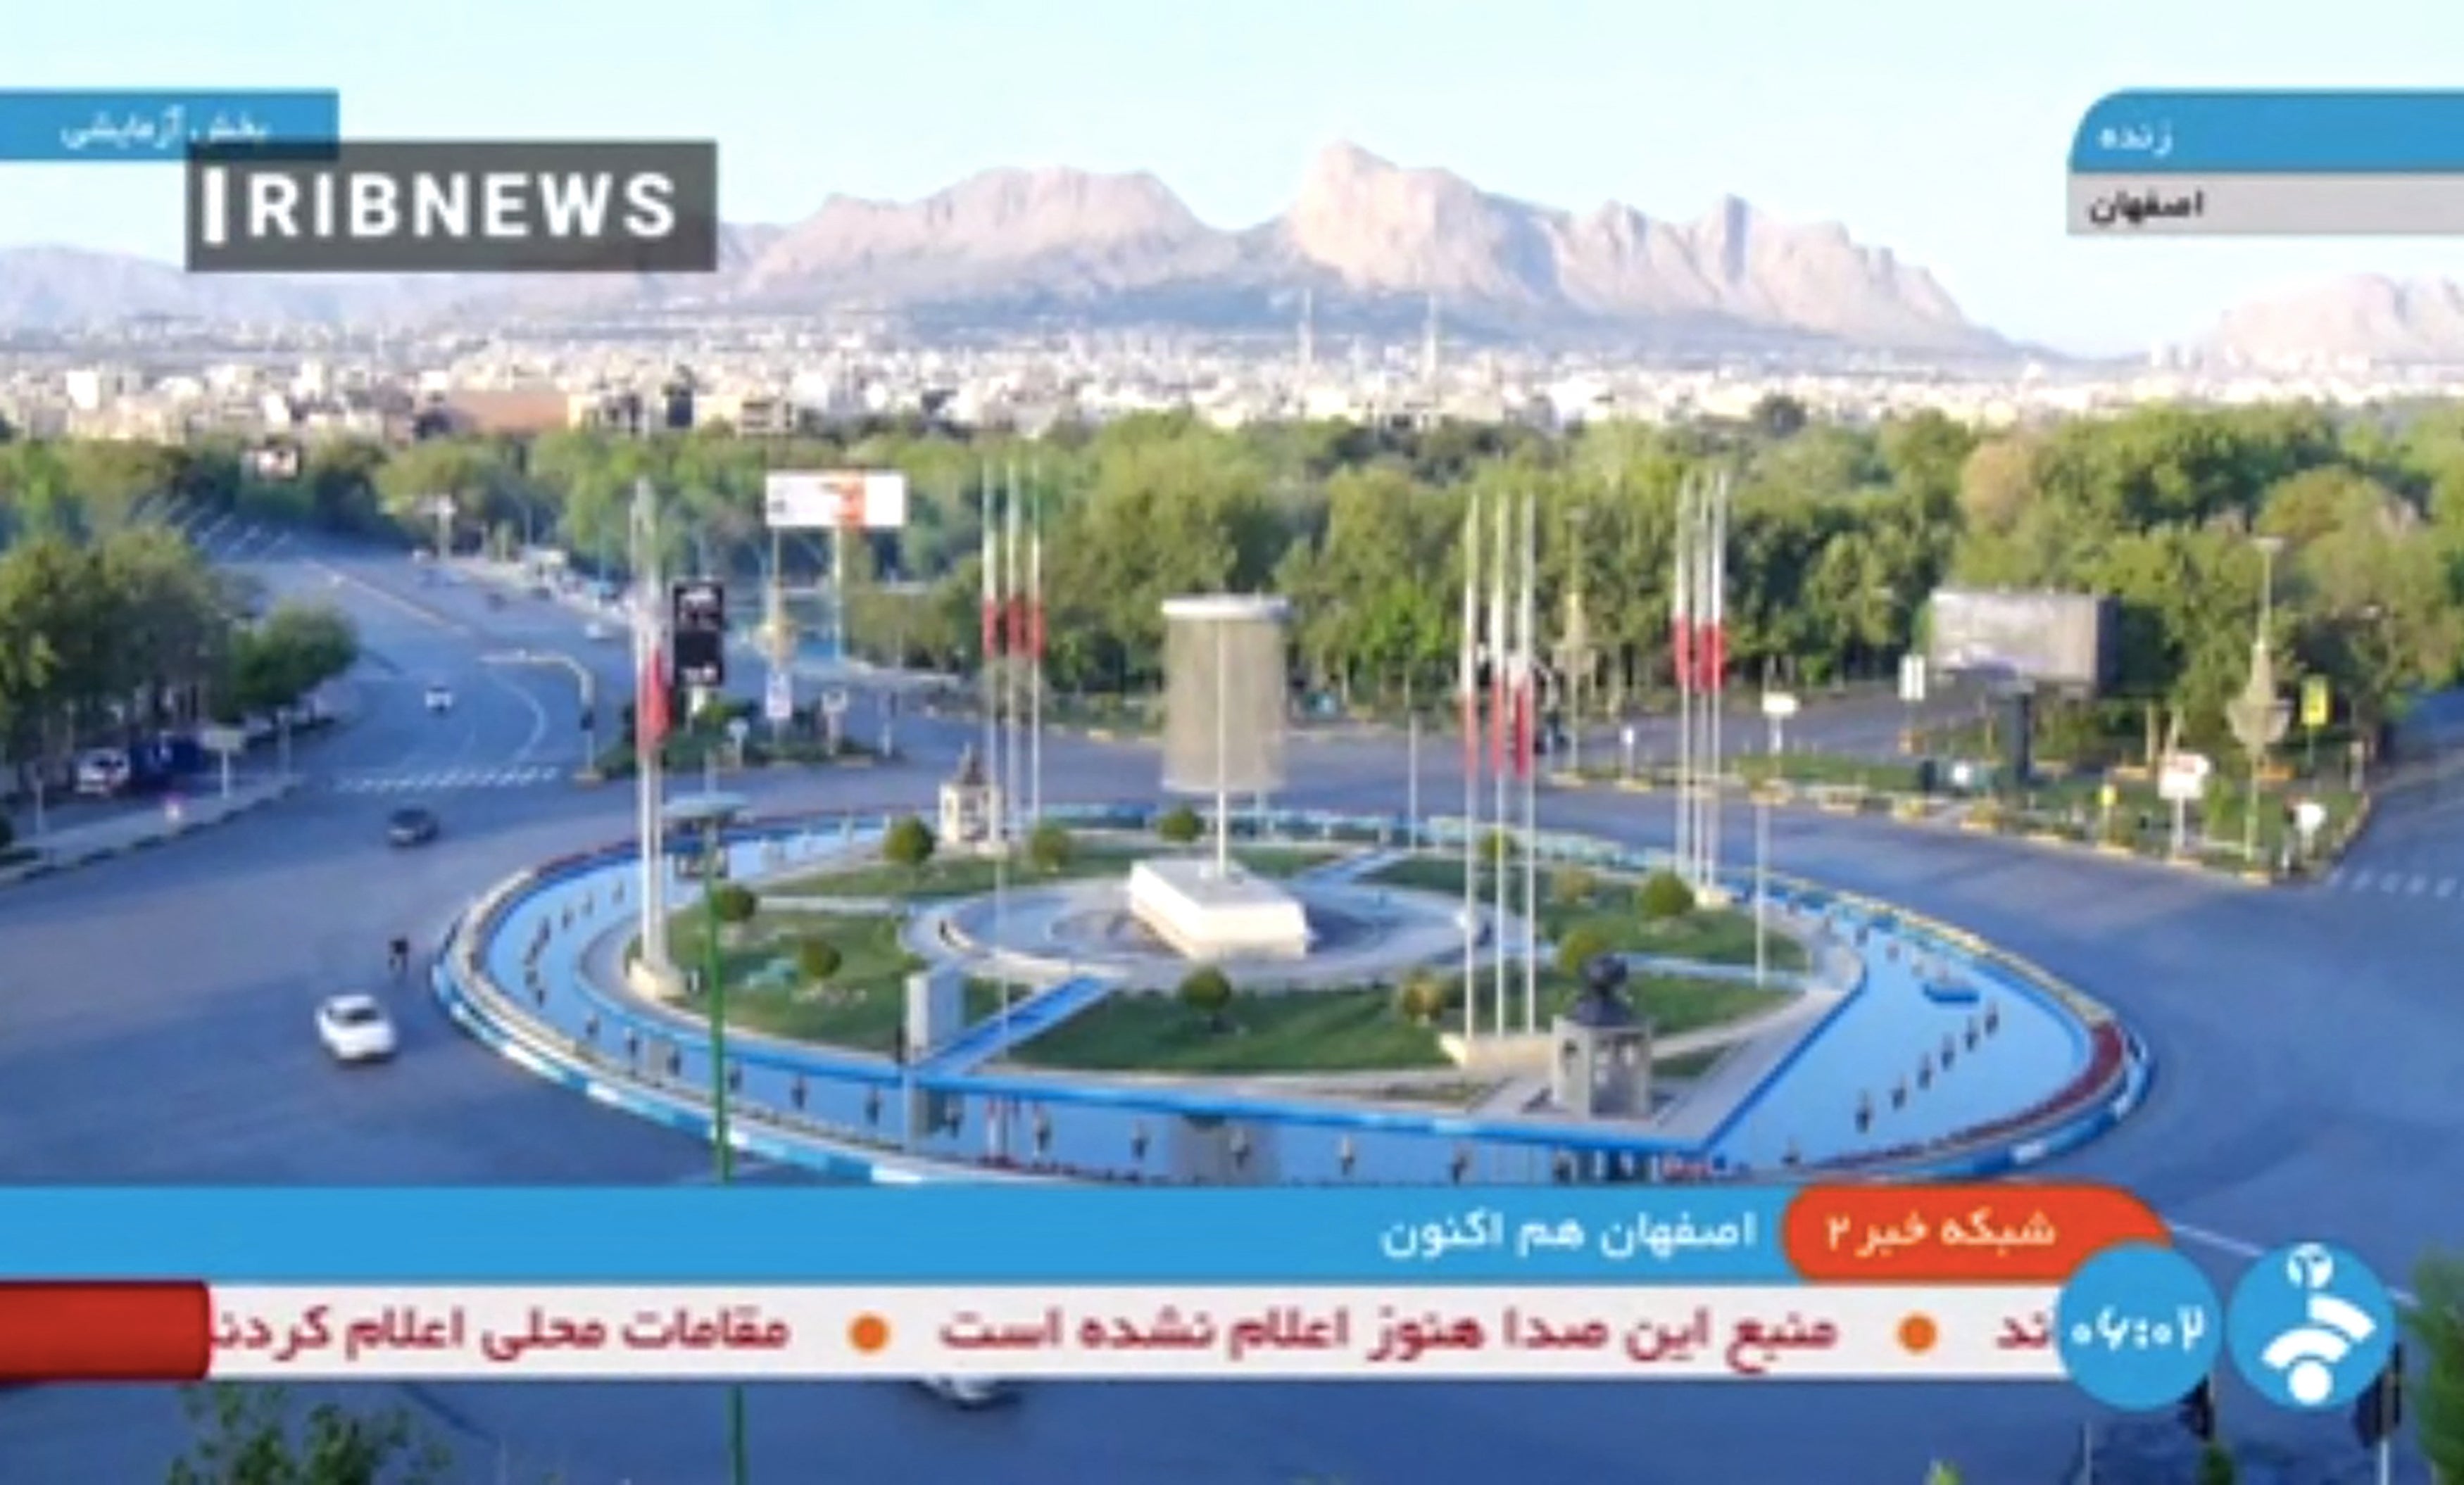 A handout image grab made available by the Iranian state TV, the Islamic Republic of Iran Broadcasting (IRIB), shows what the TV said was a live picture of the city of Isfahan early on Friday